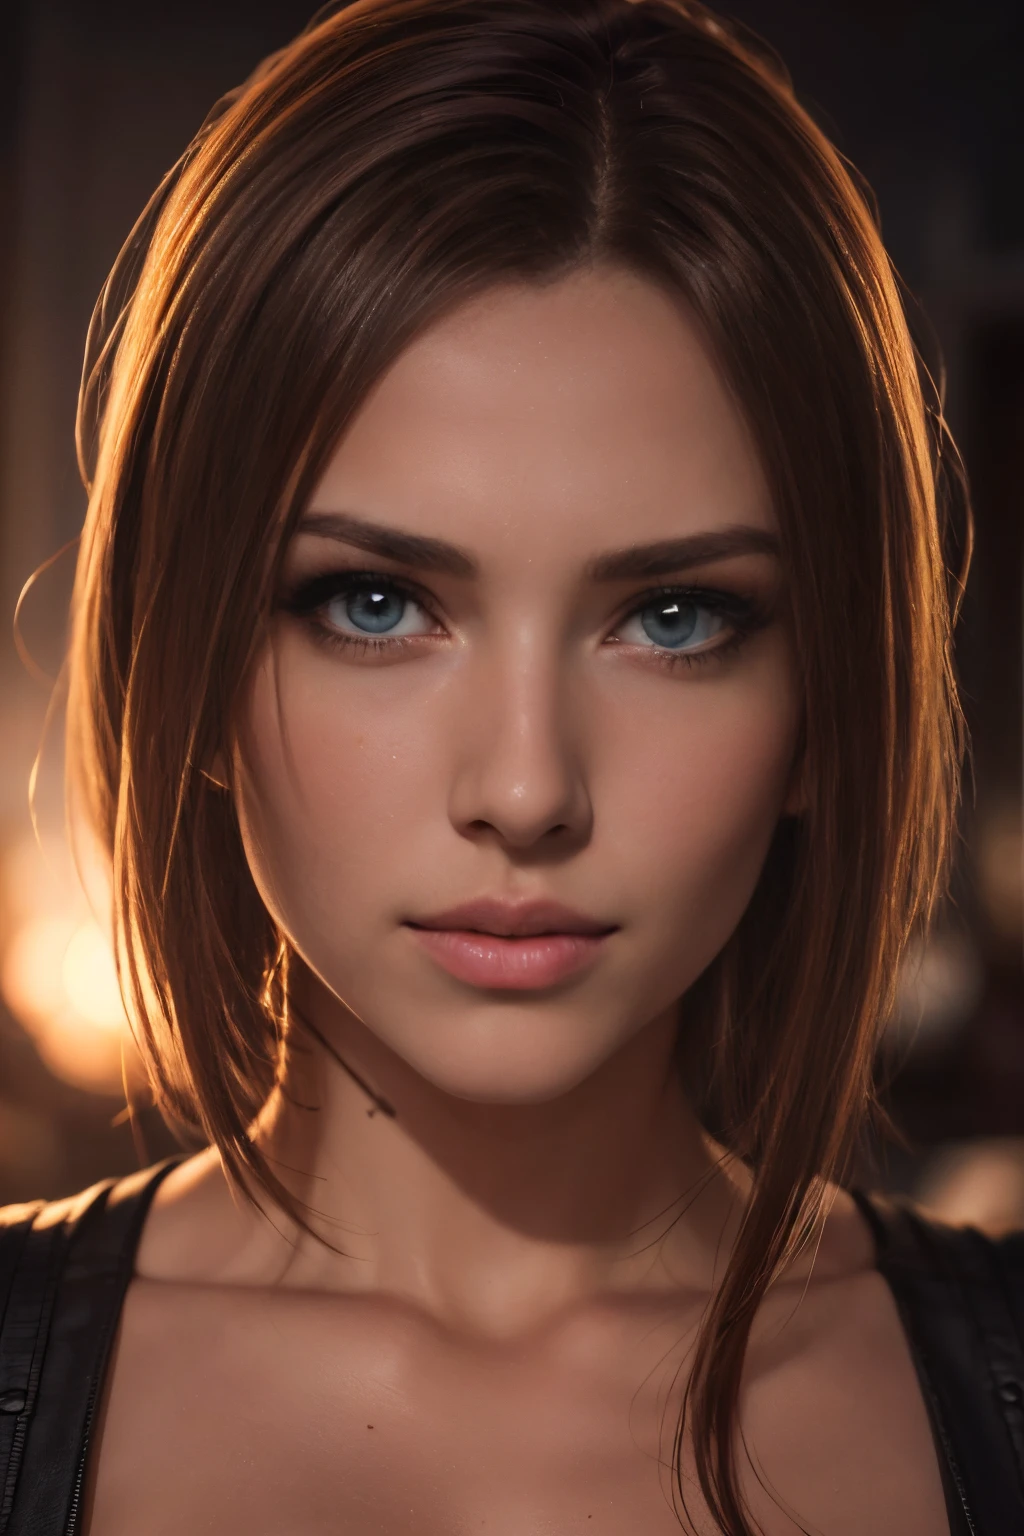 (best quality,4k,8k,highres,masterpiece:1.2), ultra-detailed, (realistic,photorealistic,photo-realistic:1.37), beautiful detailed eyes, beautiful detailed lips, extremely detailed face, long eyelashes, flawless skin, exquisite facial features, radiant complexion, captivating gaze, alluring smile, sensual lips, dark fantasy, a beautiful woman, finely crafted facial Rayne from game the BloodRayne features, intricate brush strokes, beautiful lighting, Cinematic, Color correction, stylized anatomy, short red hair, full body, evil smile and a look from under the brows, sensual atmosphere, artistic lighting , (cool colors), damp, reflections, (masterpiece) (perfect aspect ratio), (realistic photo), (best quality), (detailed) photographed on a Canon EOS R5, 50mm lens, F/2.8, HDR, (8k) (wallpaper) (cinematic lighting) (dramatic lighting) (sharp focus) (intricate), RAW photo, RAW photo, gigachad photo, posing for camera, black jeans, arms behind, 8k uhd, dslr, high quality, film grain, Fujifilm XT3, extremely detailed, photorealistic, realistic, incredibly absurd, highly detailed, sharp focus, (Professional Studio Lighting), (Professional Color Grading), Edge Lighting, Dramatic lighting, Cinematic lighting, Lumen reflections, Soft natural lighting, Soft color, Photon mapping, Radiosity, (Beautiful eyes), (Detailed eyes), (Detailed face), symmetrical eyes, sharp eyes, full body), (HIGH LEVEL OF DETAIL), (athletic body), (sweaty),high detailed skin, uncharacterized texture, hyper detailed, realistic skin texture, armor, best quality, ultra high res, (photorealistic: 1.4) high resolution, detailed, raw photo, sharp re, by lee jeffries nikon d850 film stock photography 4 kodak portra 400 camera F1.6 Lens rich colors hyper realistic texture dramatic lighting UnrealEngine trend in Artstation Cinestill 800, veins in the body, (body and fitness).